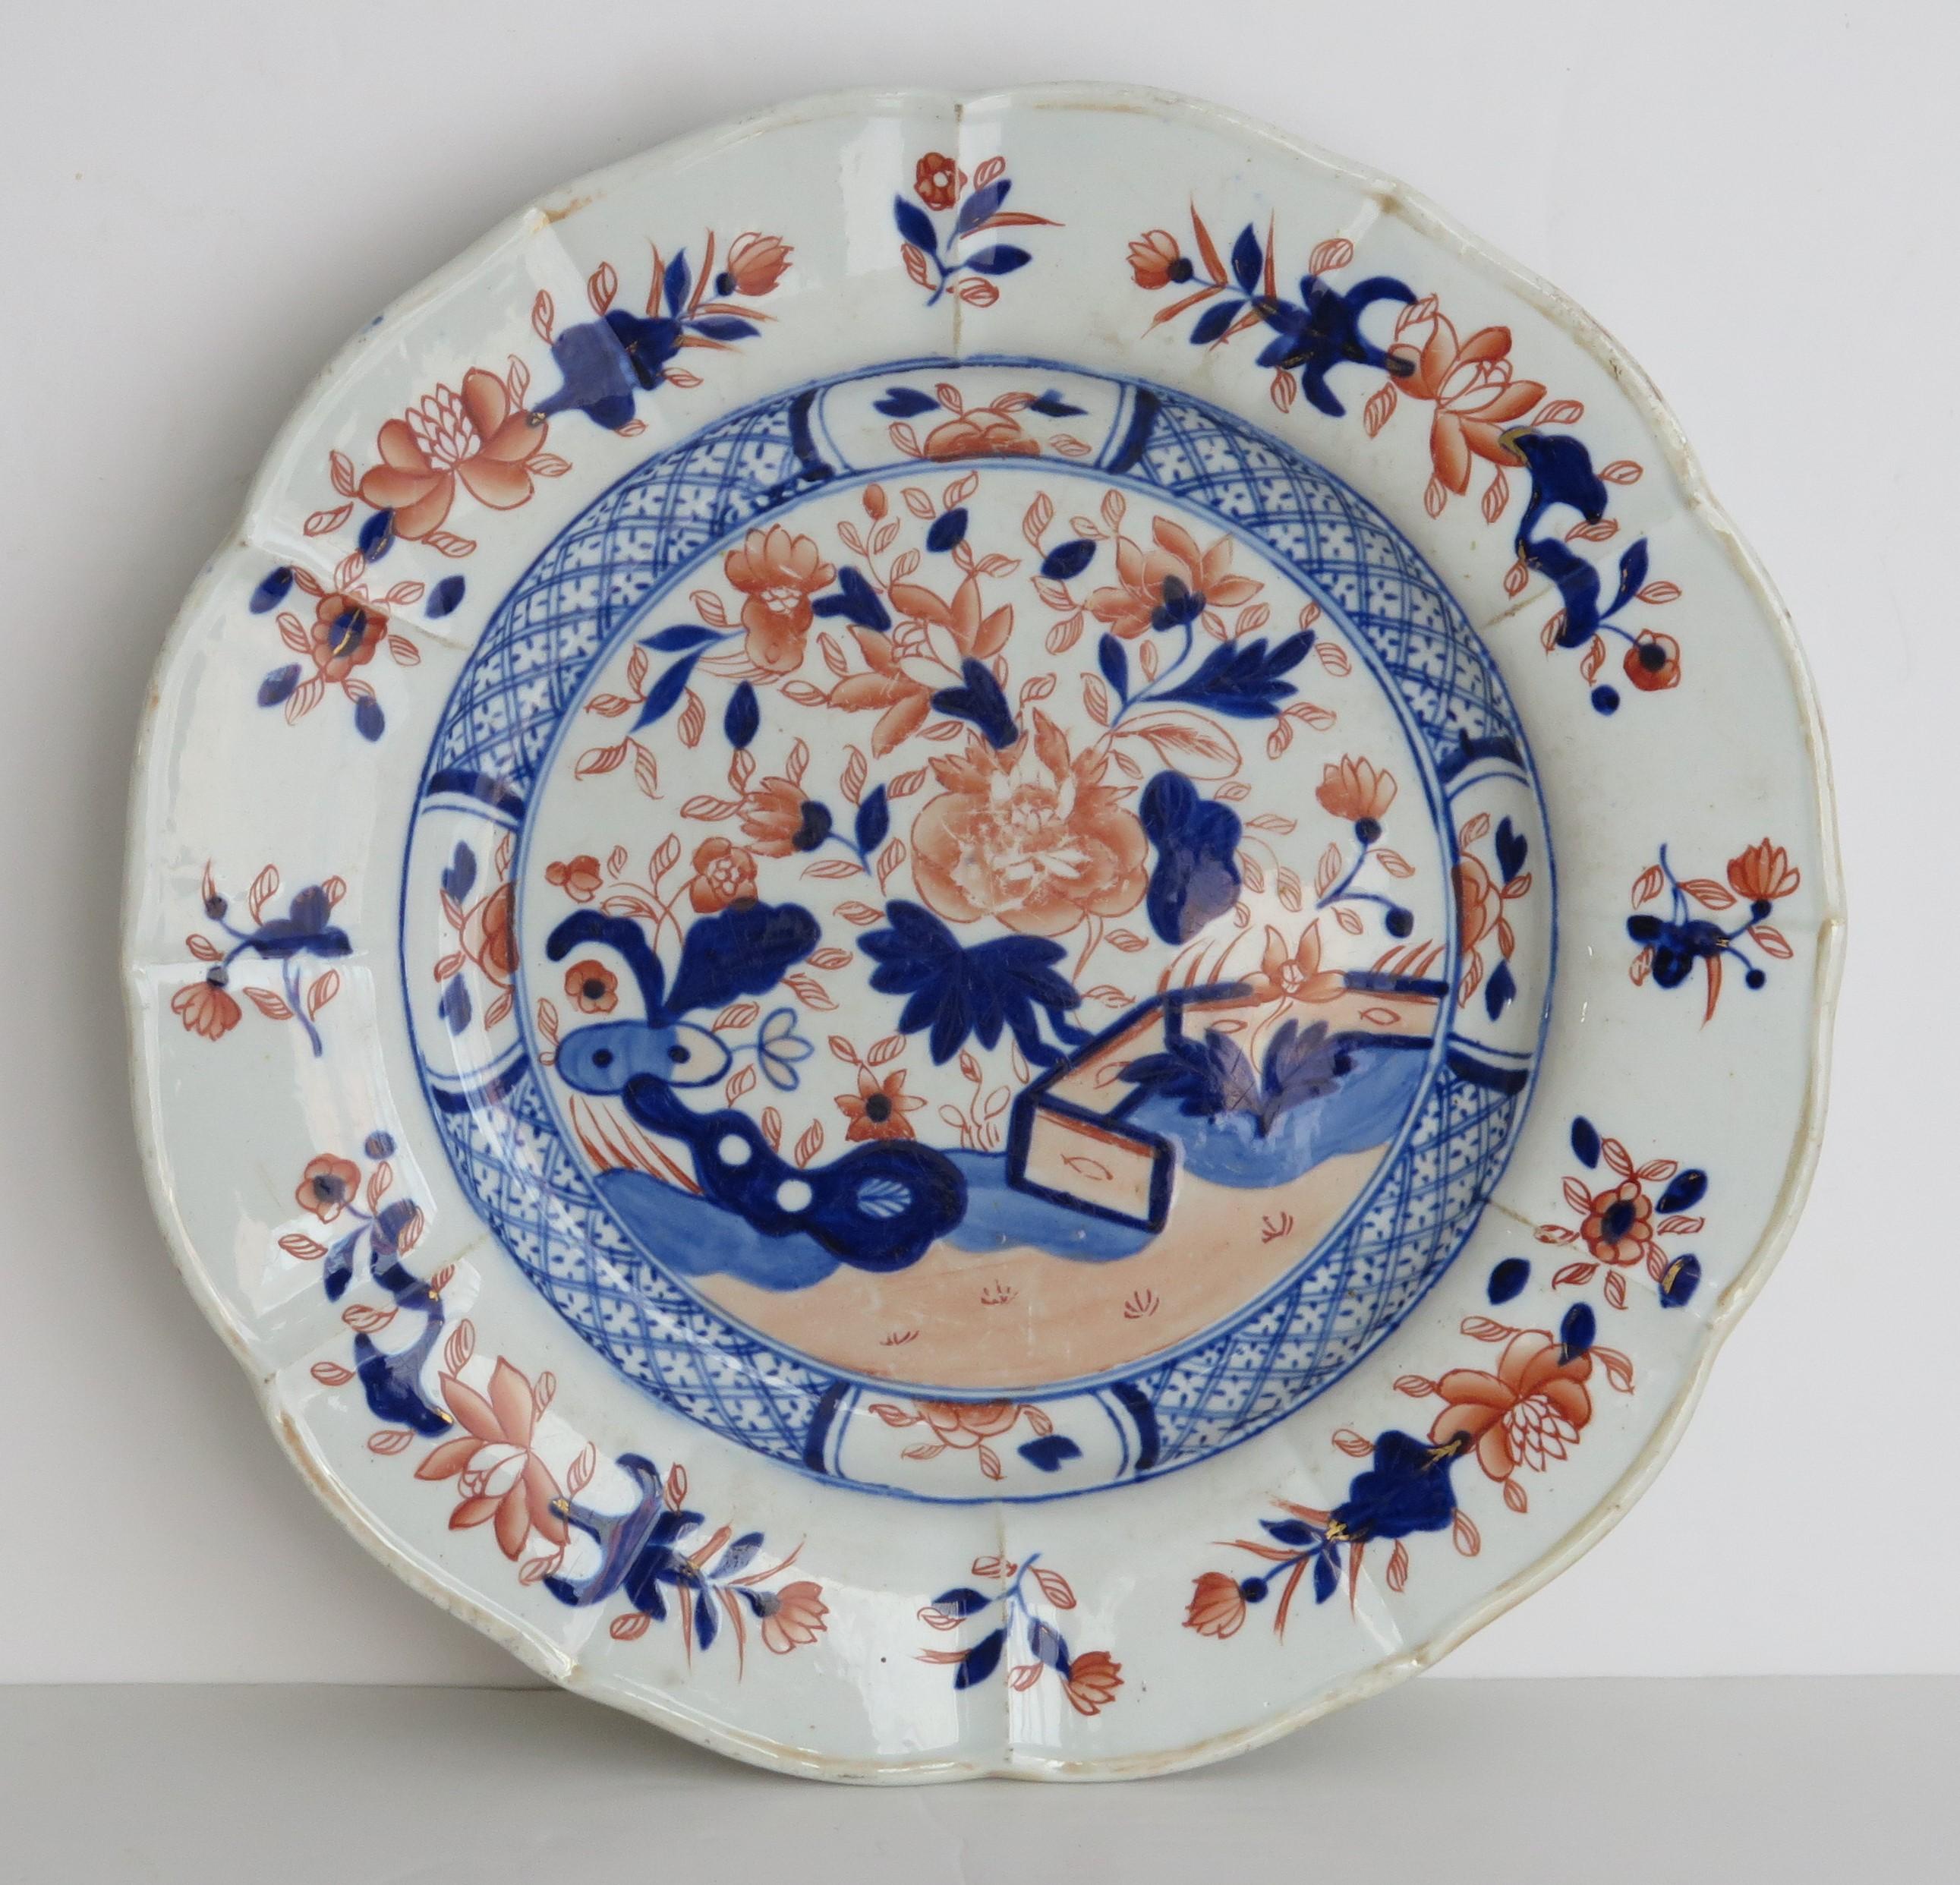 English Early Mason's Ironstone Desert Plate or Dish in Fence Japan Pattern, circa 1818